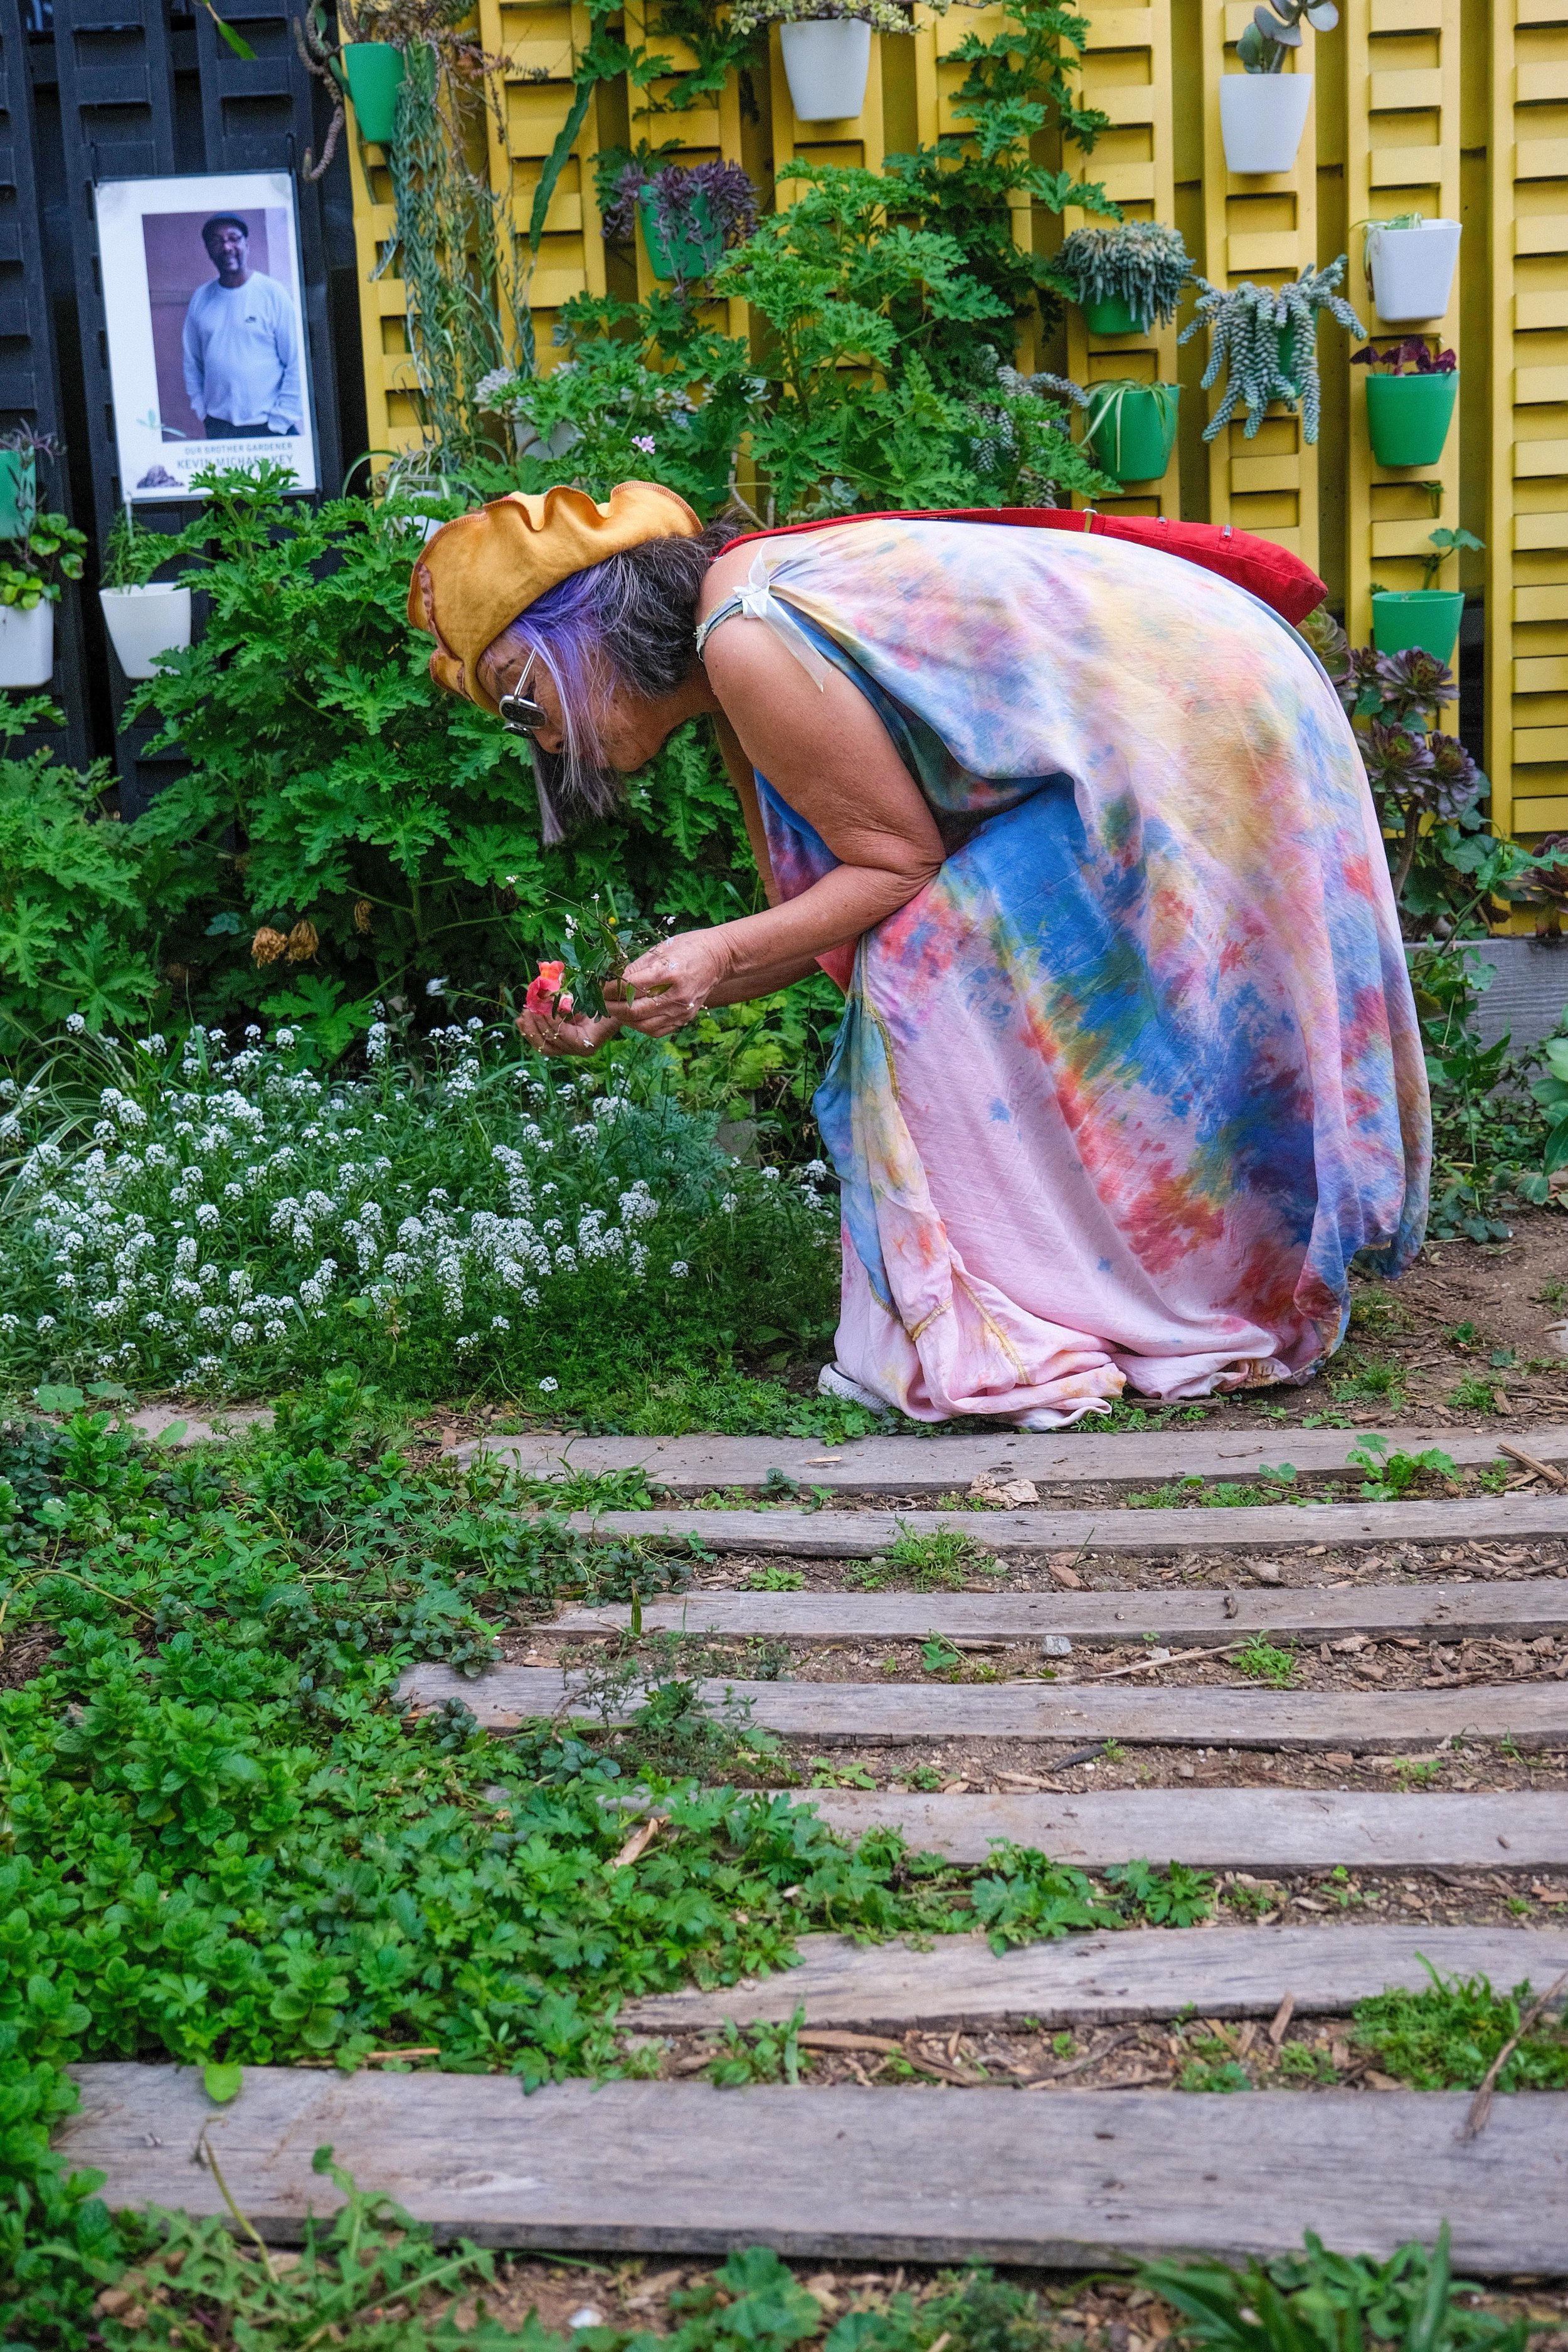  Rain Boe Wave picks more flowers to add to her bouquet. These flowers have a distinct caramel-like scent.Spring Street Community Garden in Downtown Los Angeles on Monday, March 21, 2022. (Anna Sophia Moltke | The Corsair) 